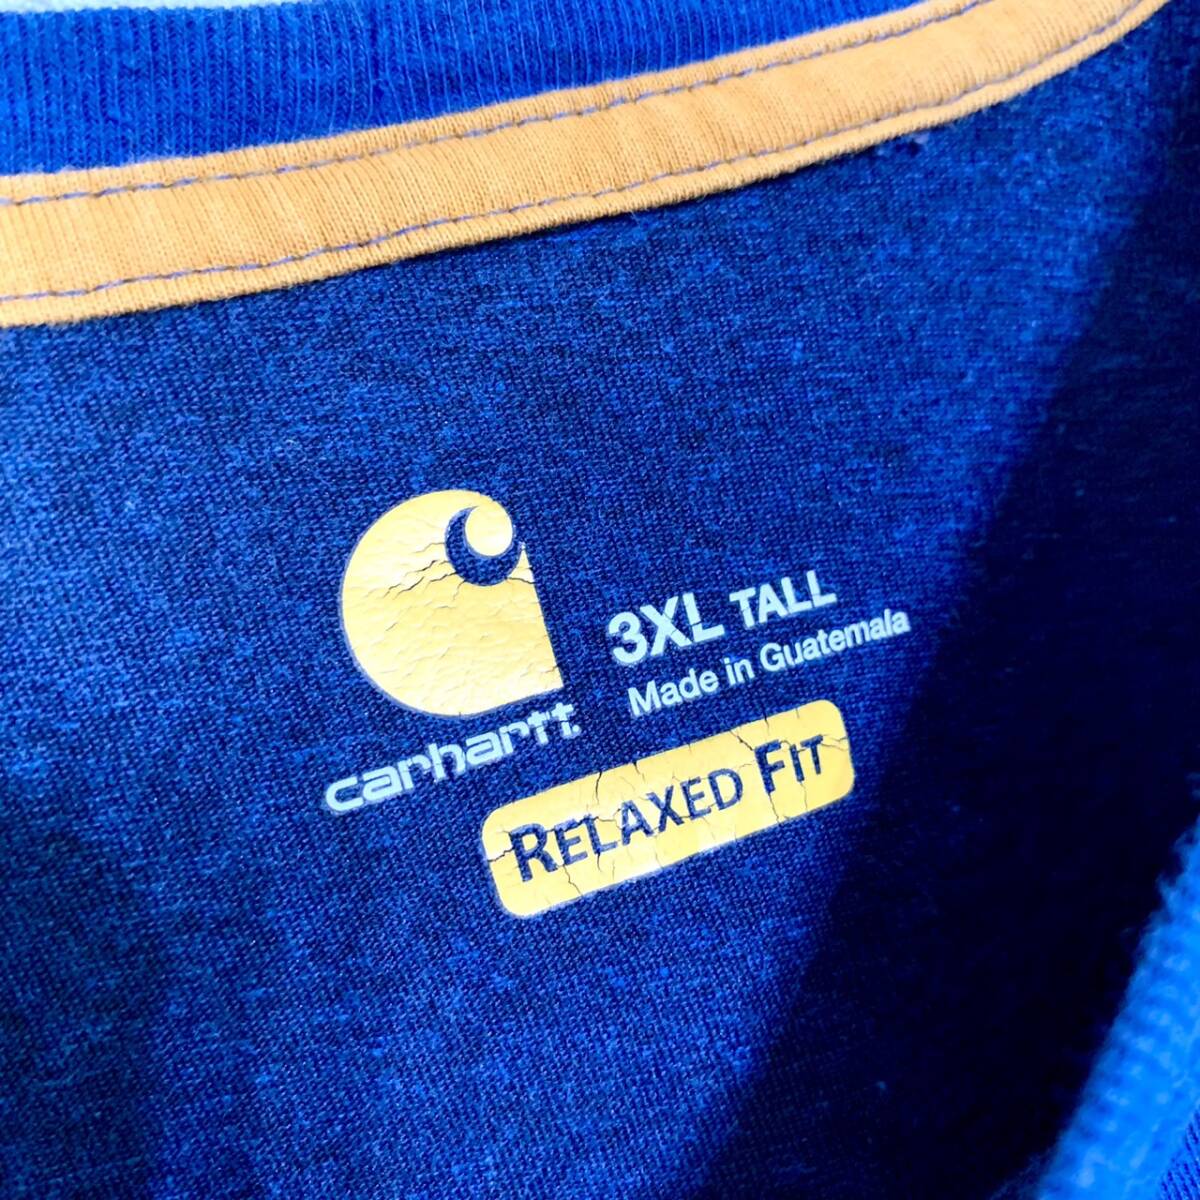 Carhartt カーハート ロゴポケット半袖Tシャツ カットソー RELAXED FIT FORCE ブルー 3XL TALL_画像5